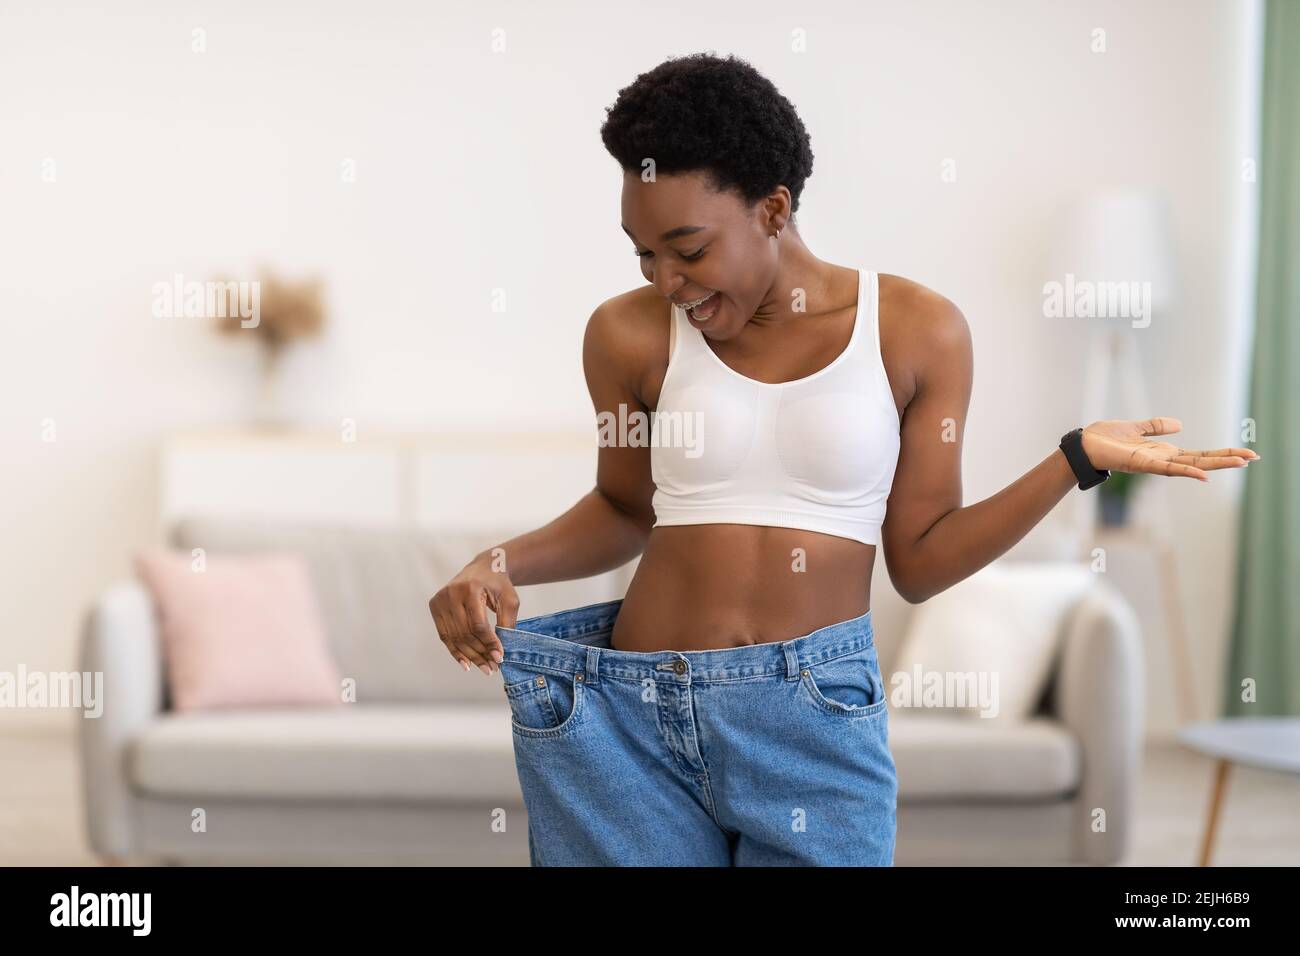 Excited Slim African Woman Wearing Oversized Pants After Weight-Loss Indoor Stock Photo